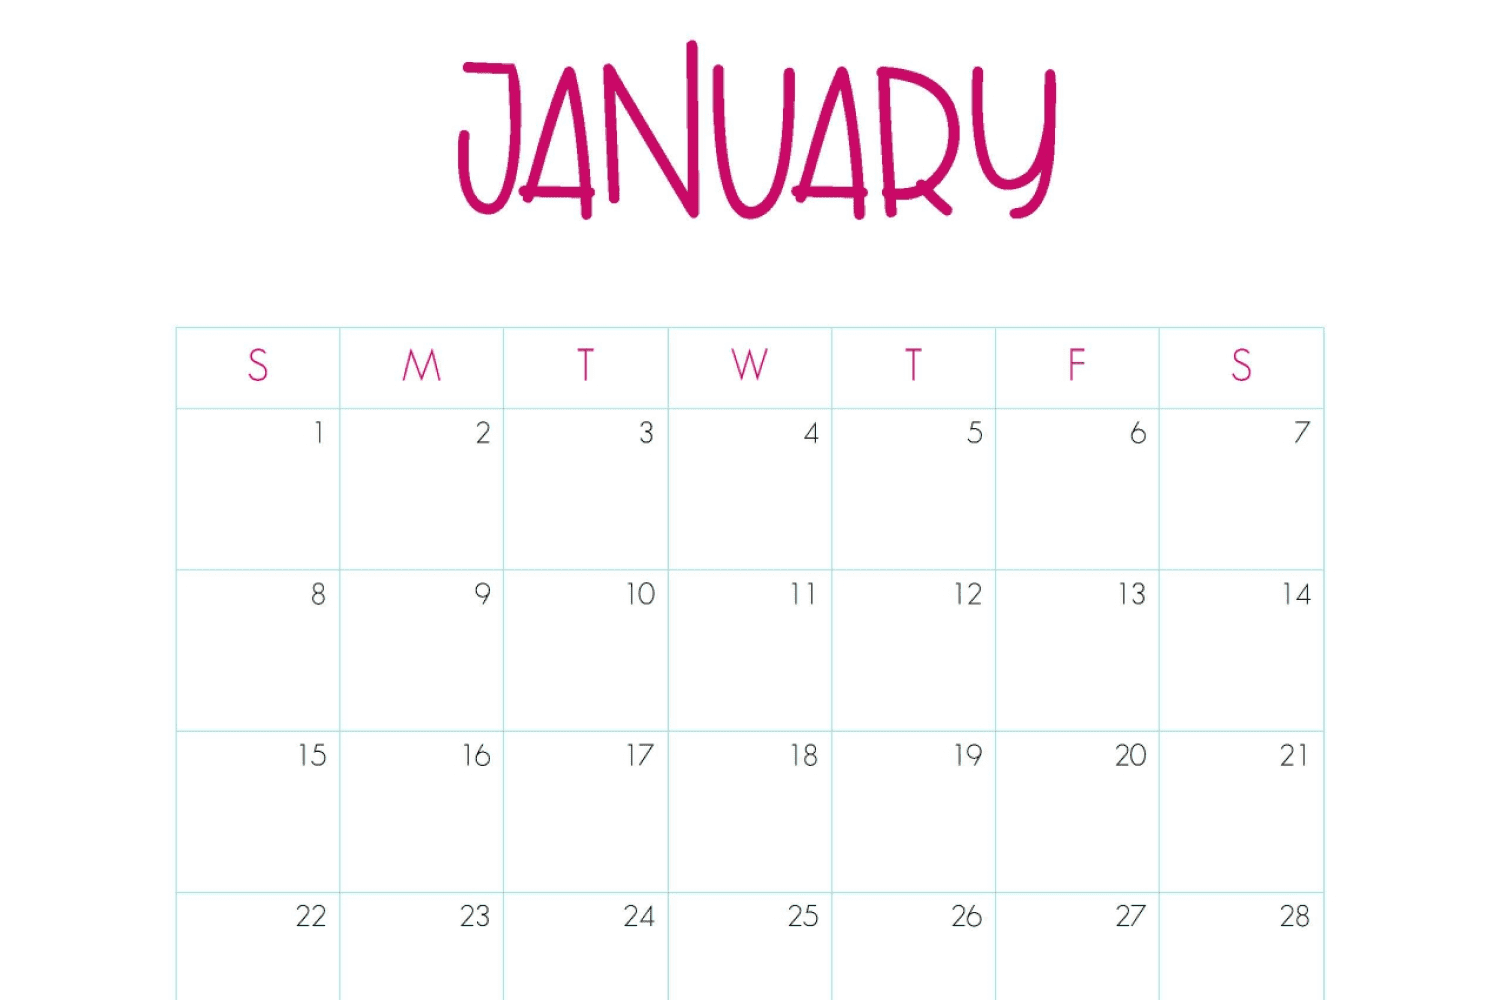 January calendar in a minimalist style with pink accents.